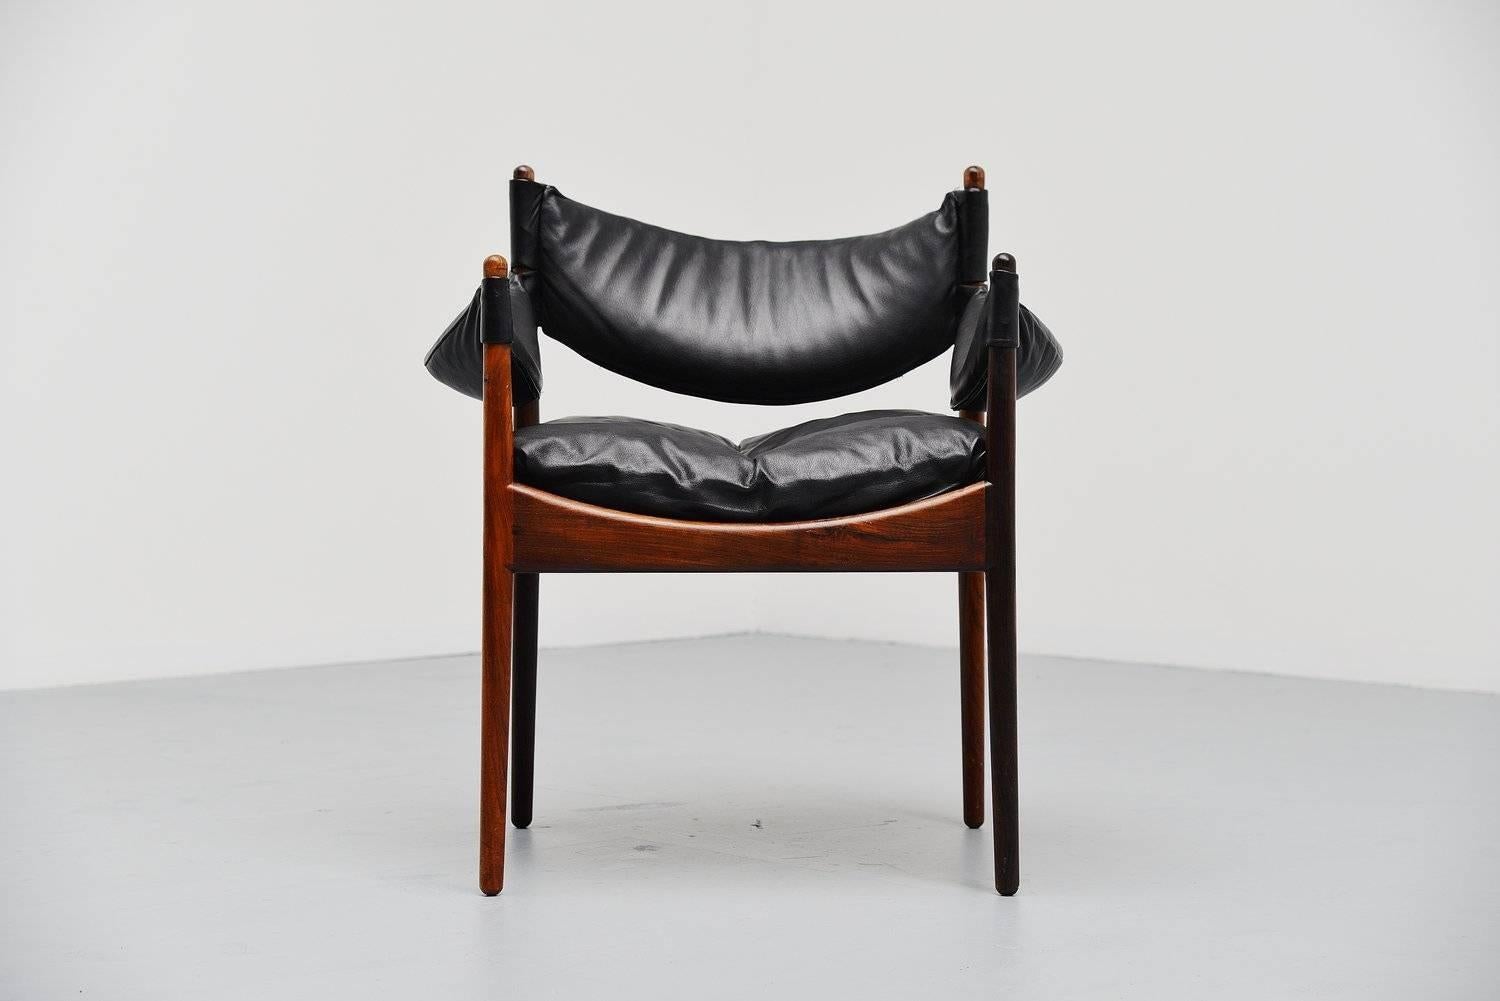 Very nice armchair designed by Kristian Solmer Vedel for Søren Willadsen, Denmark, 1963. This nice sculpted rosewood armchair has a solid rosewood frame and black leather seat. The chair is in original condition and looks great. Very comfortable